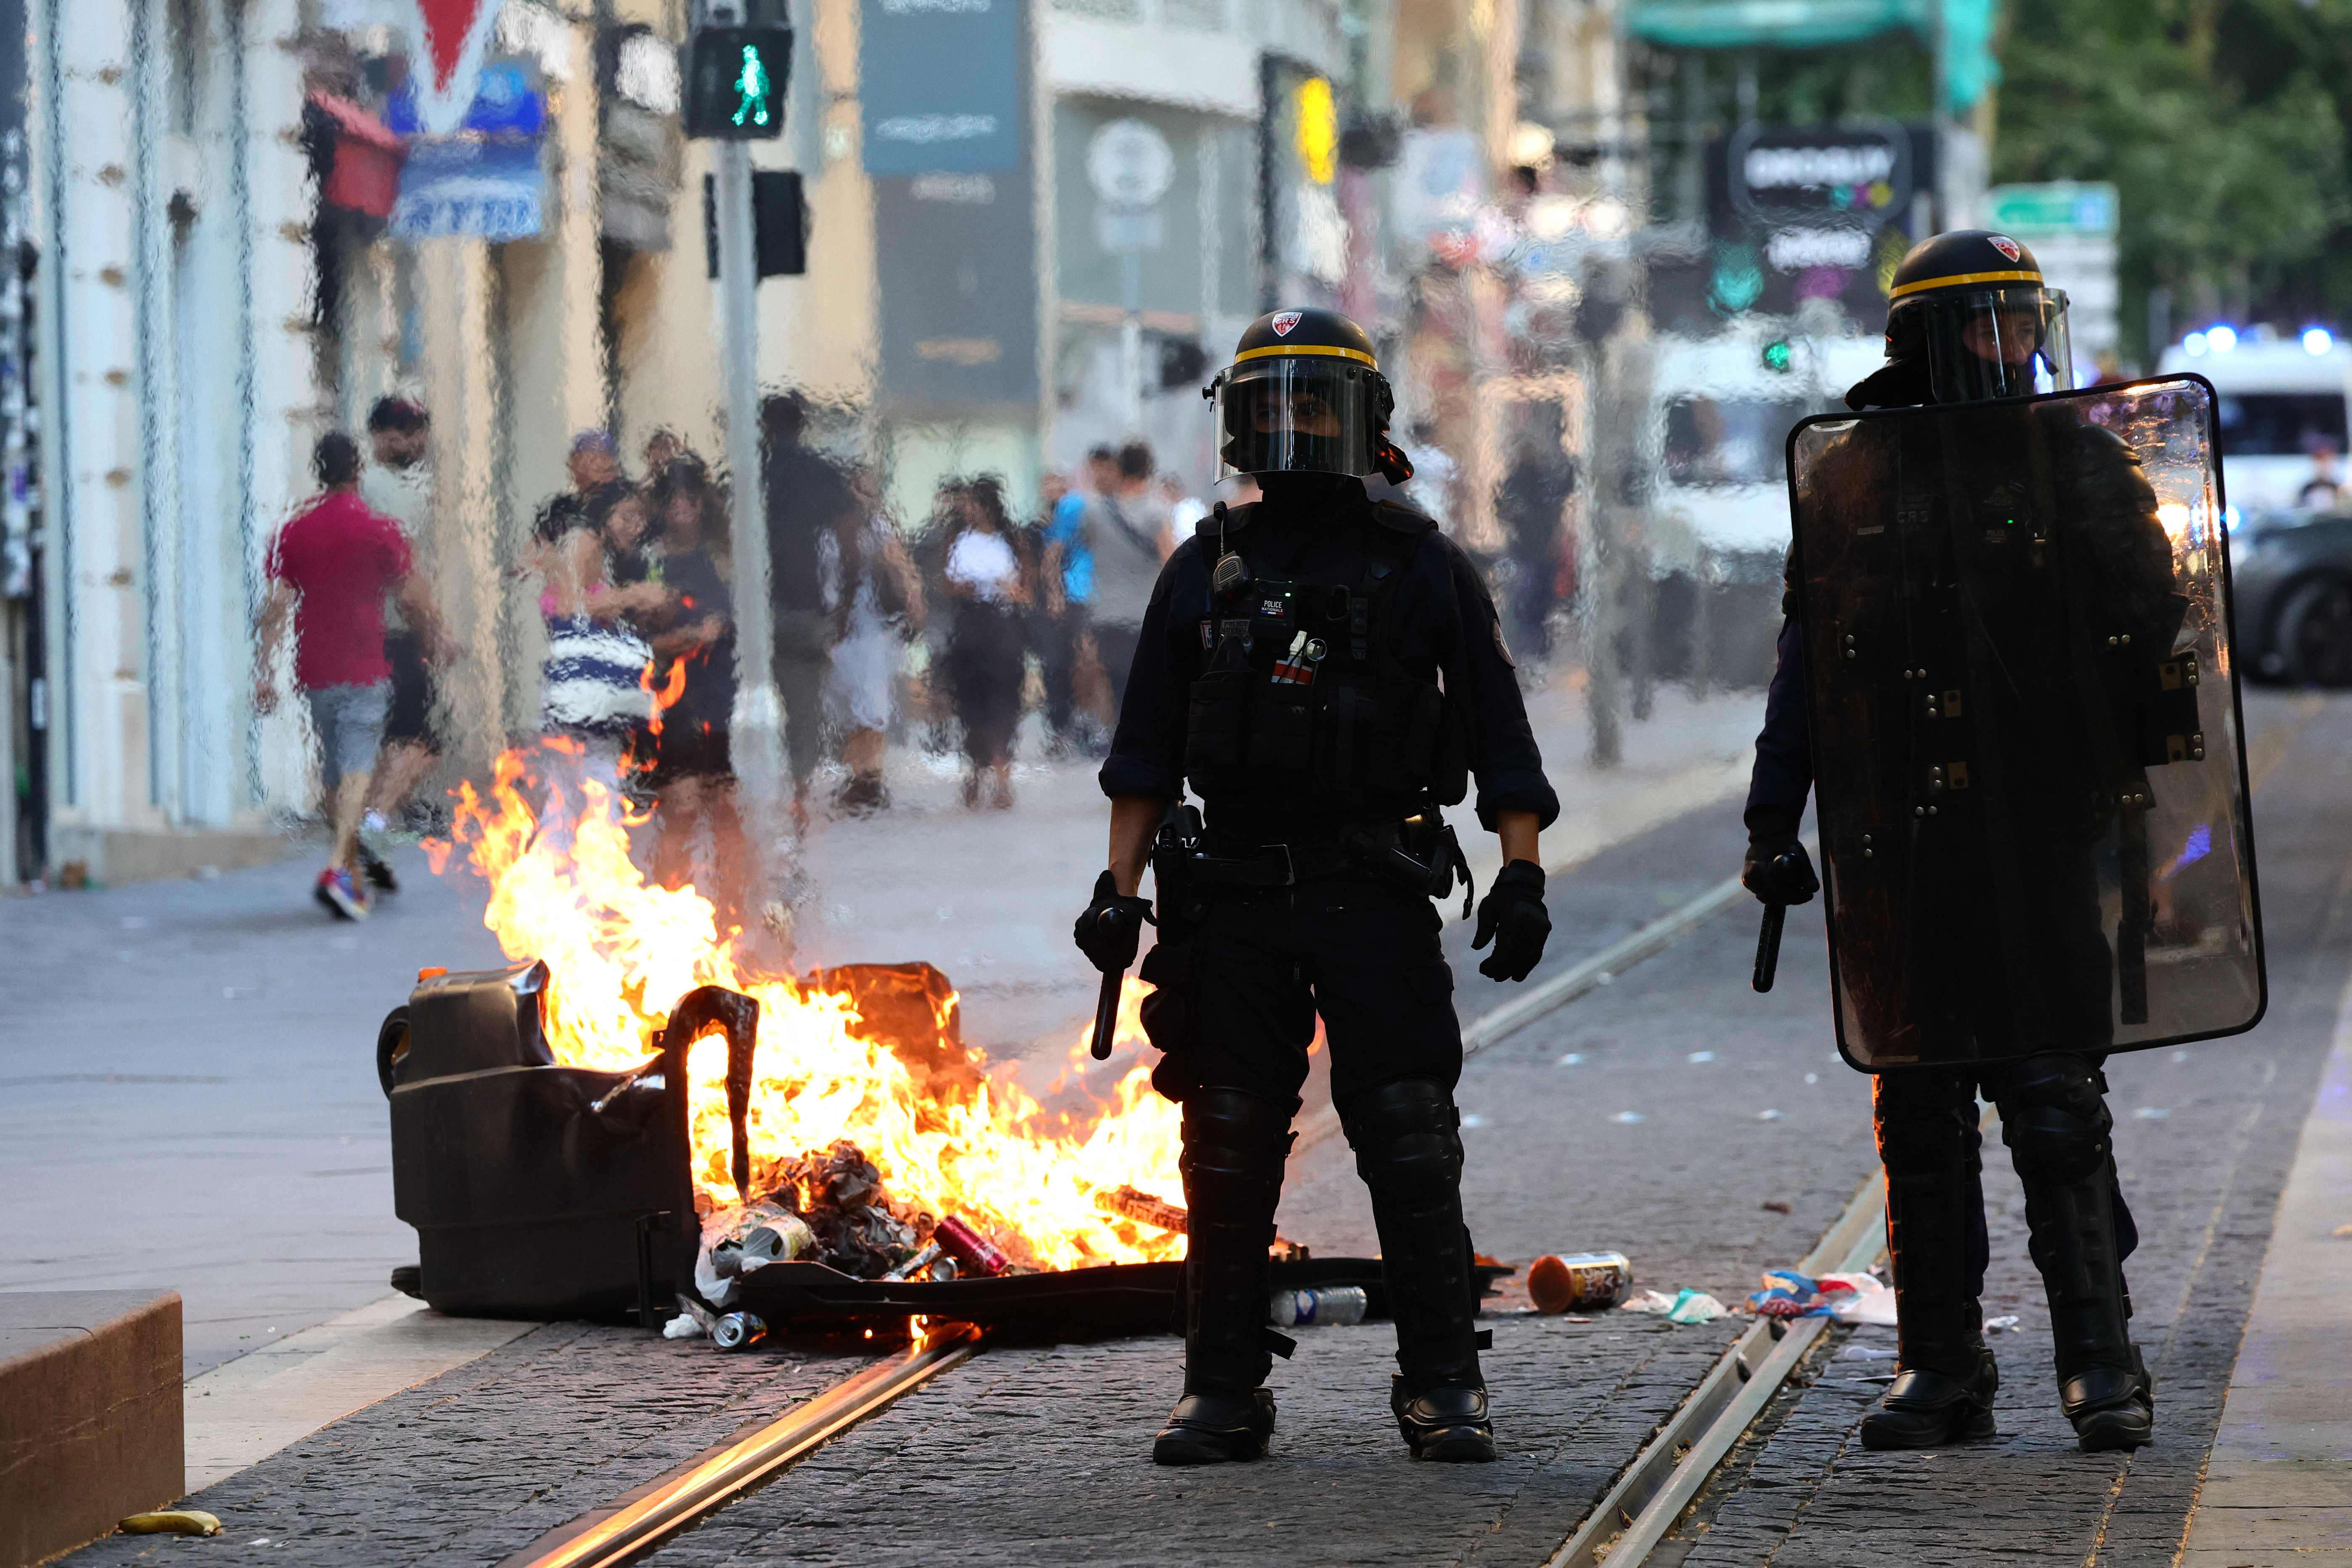 French riot police officers stand guard next to a burnt out trash bin during a demonstration against police in Marseille on Saturday